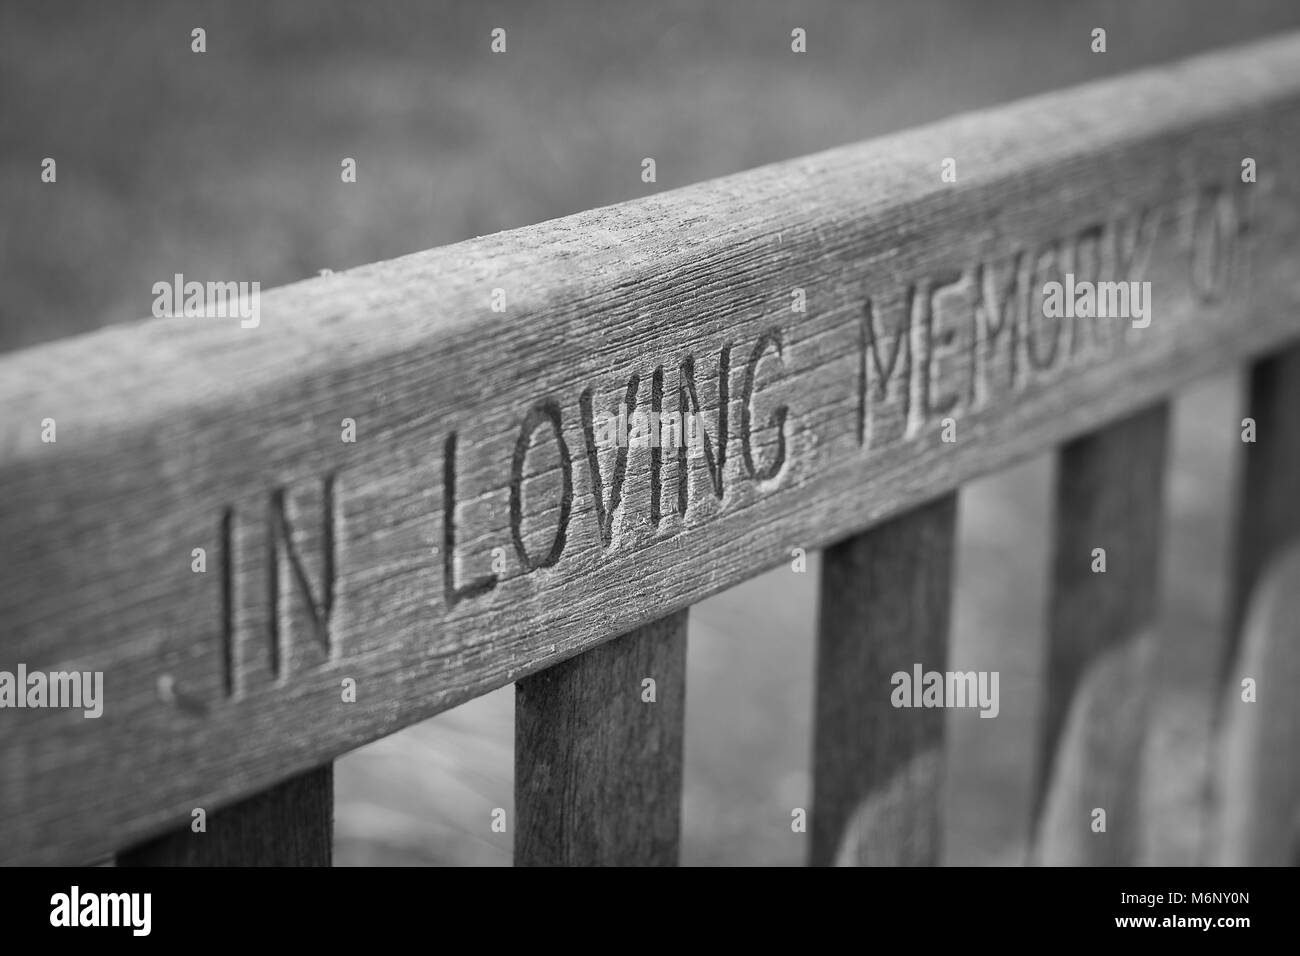 In loving memory of our Cut Out Stock Images & Pictures - Alamy